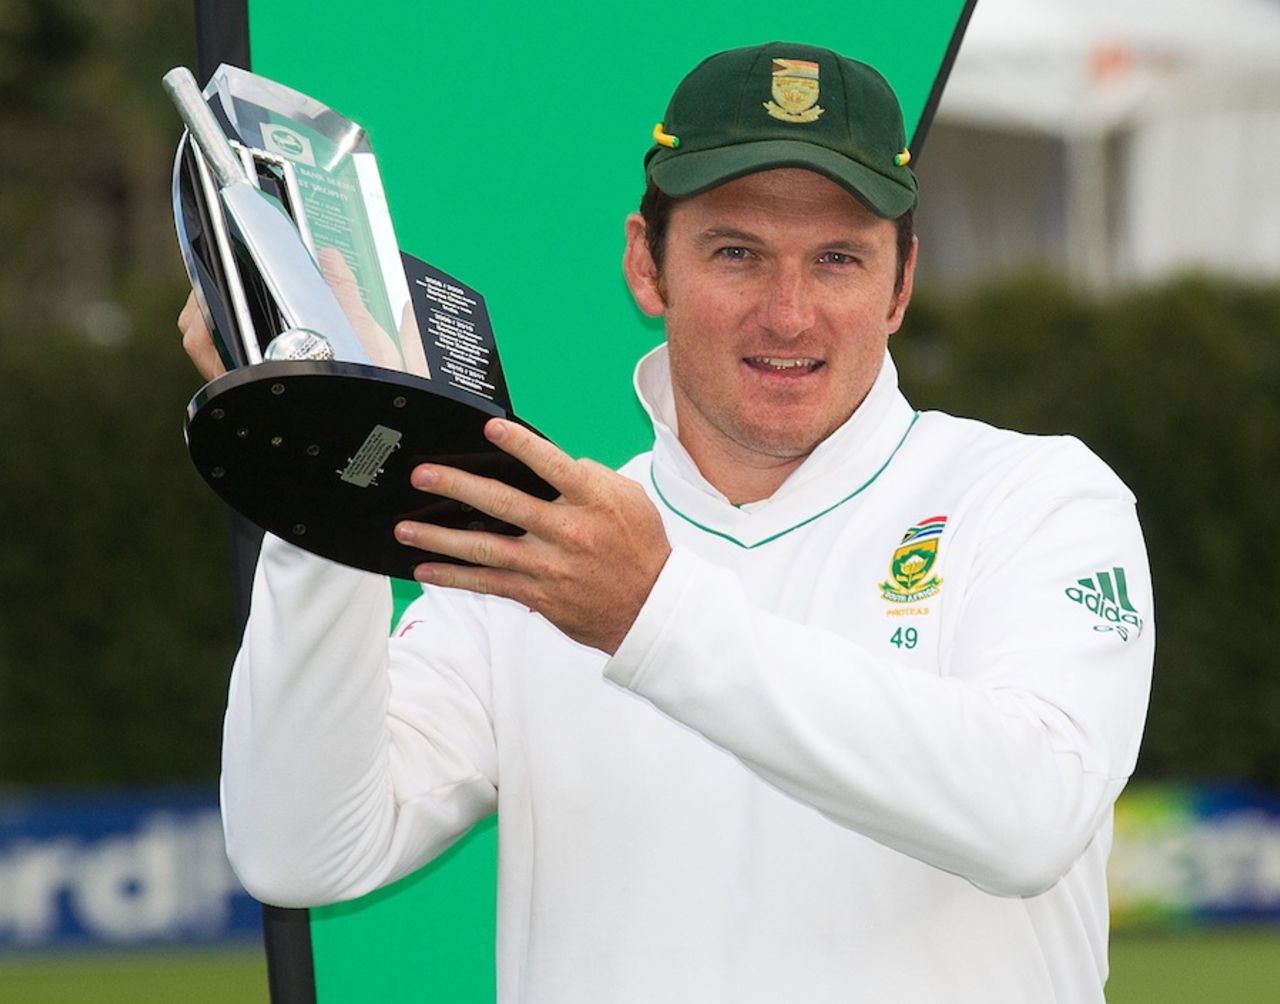 Graeme Smith with the series trophy, New Zealand v South Africa, 3rd Test, Wellington, 5th day, March 27, 2012